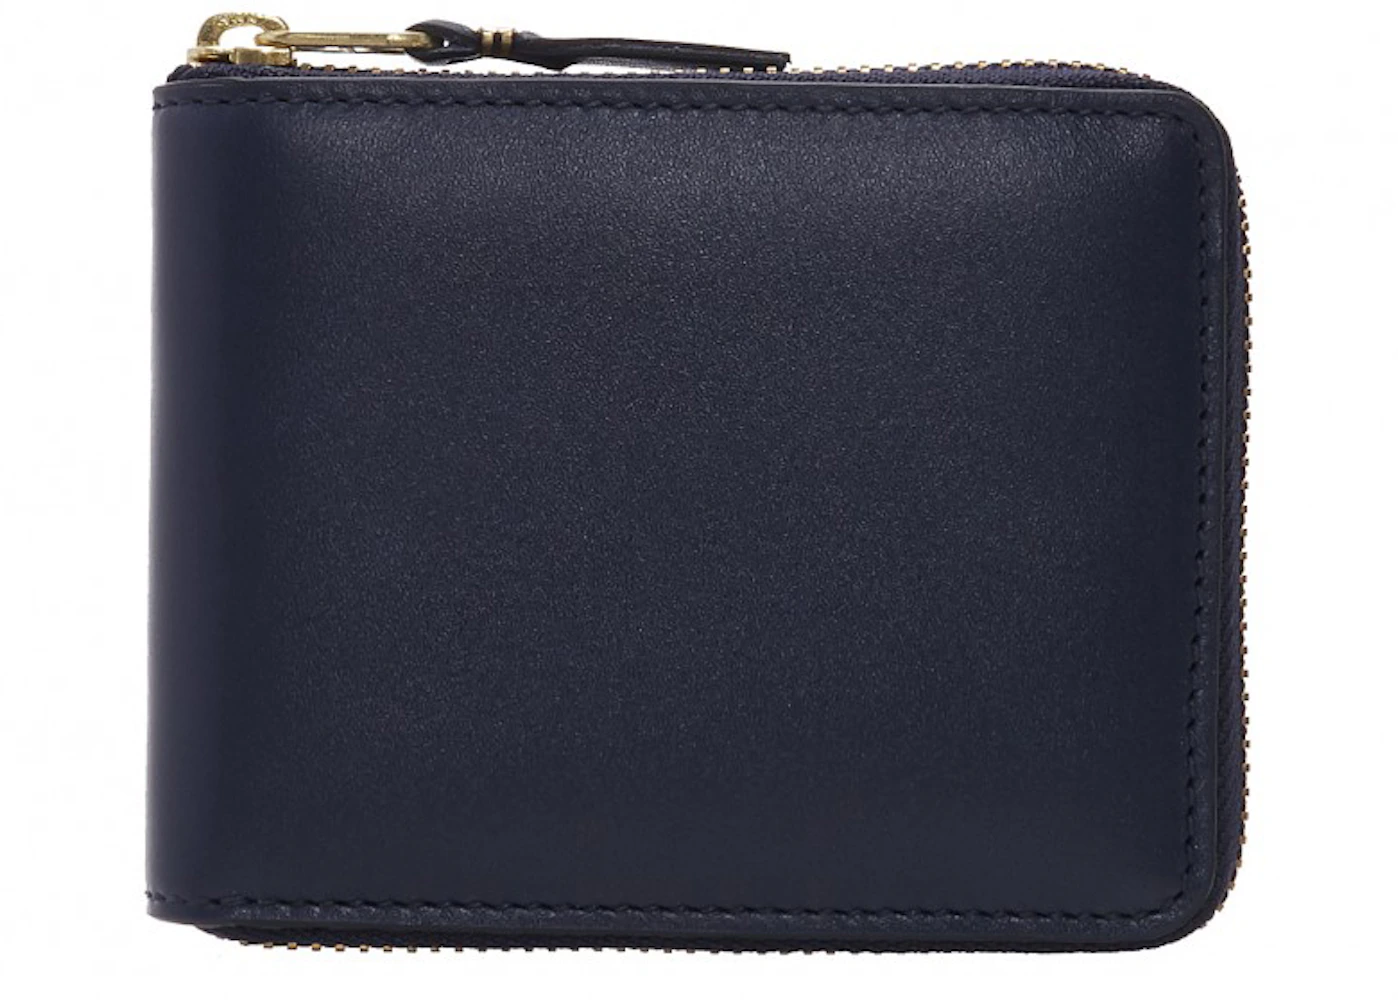 Comme des Garcons SA7100 Classic Wallet Navy in Leather with Gold-tone - US